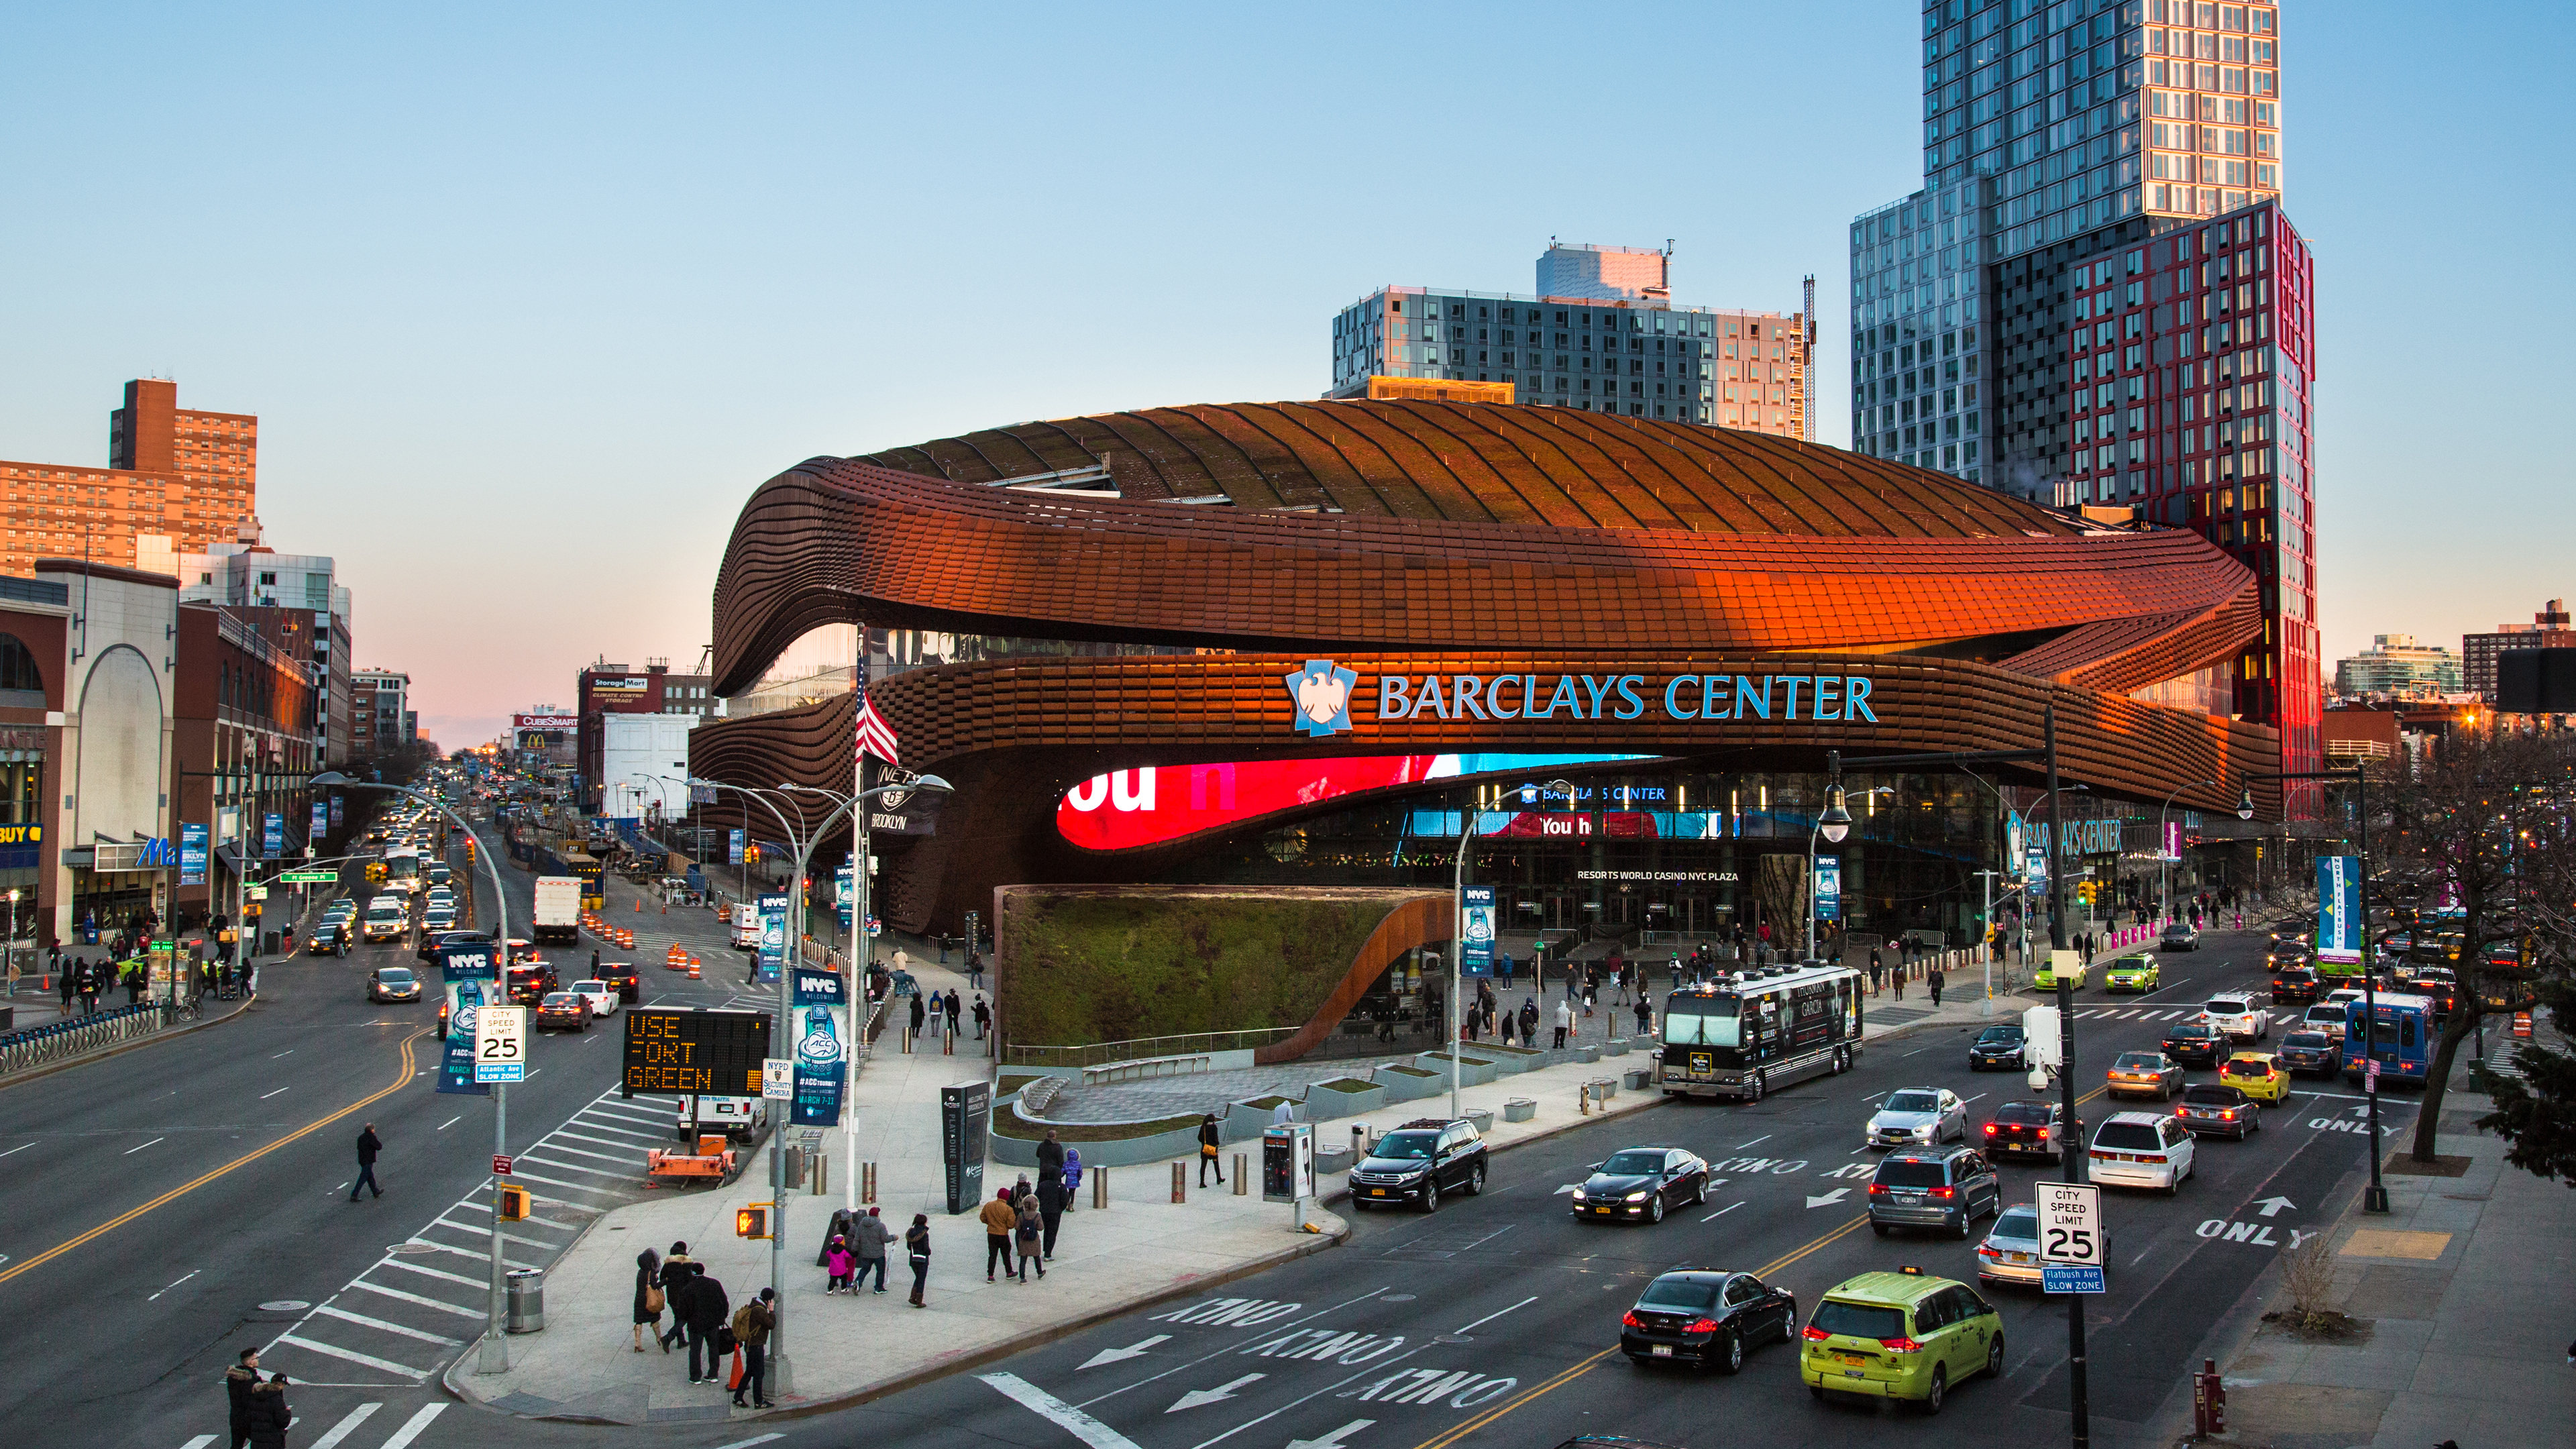 An Inside Look At The Barclays Center